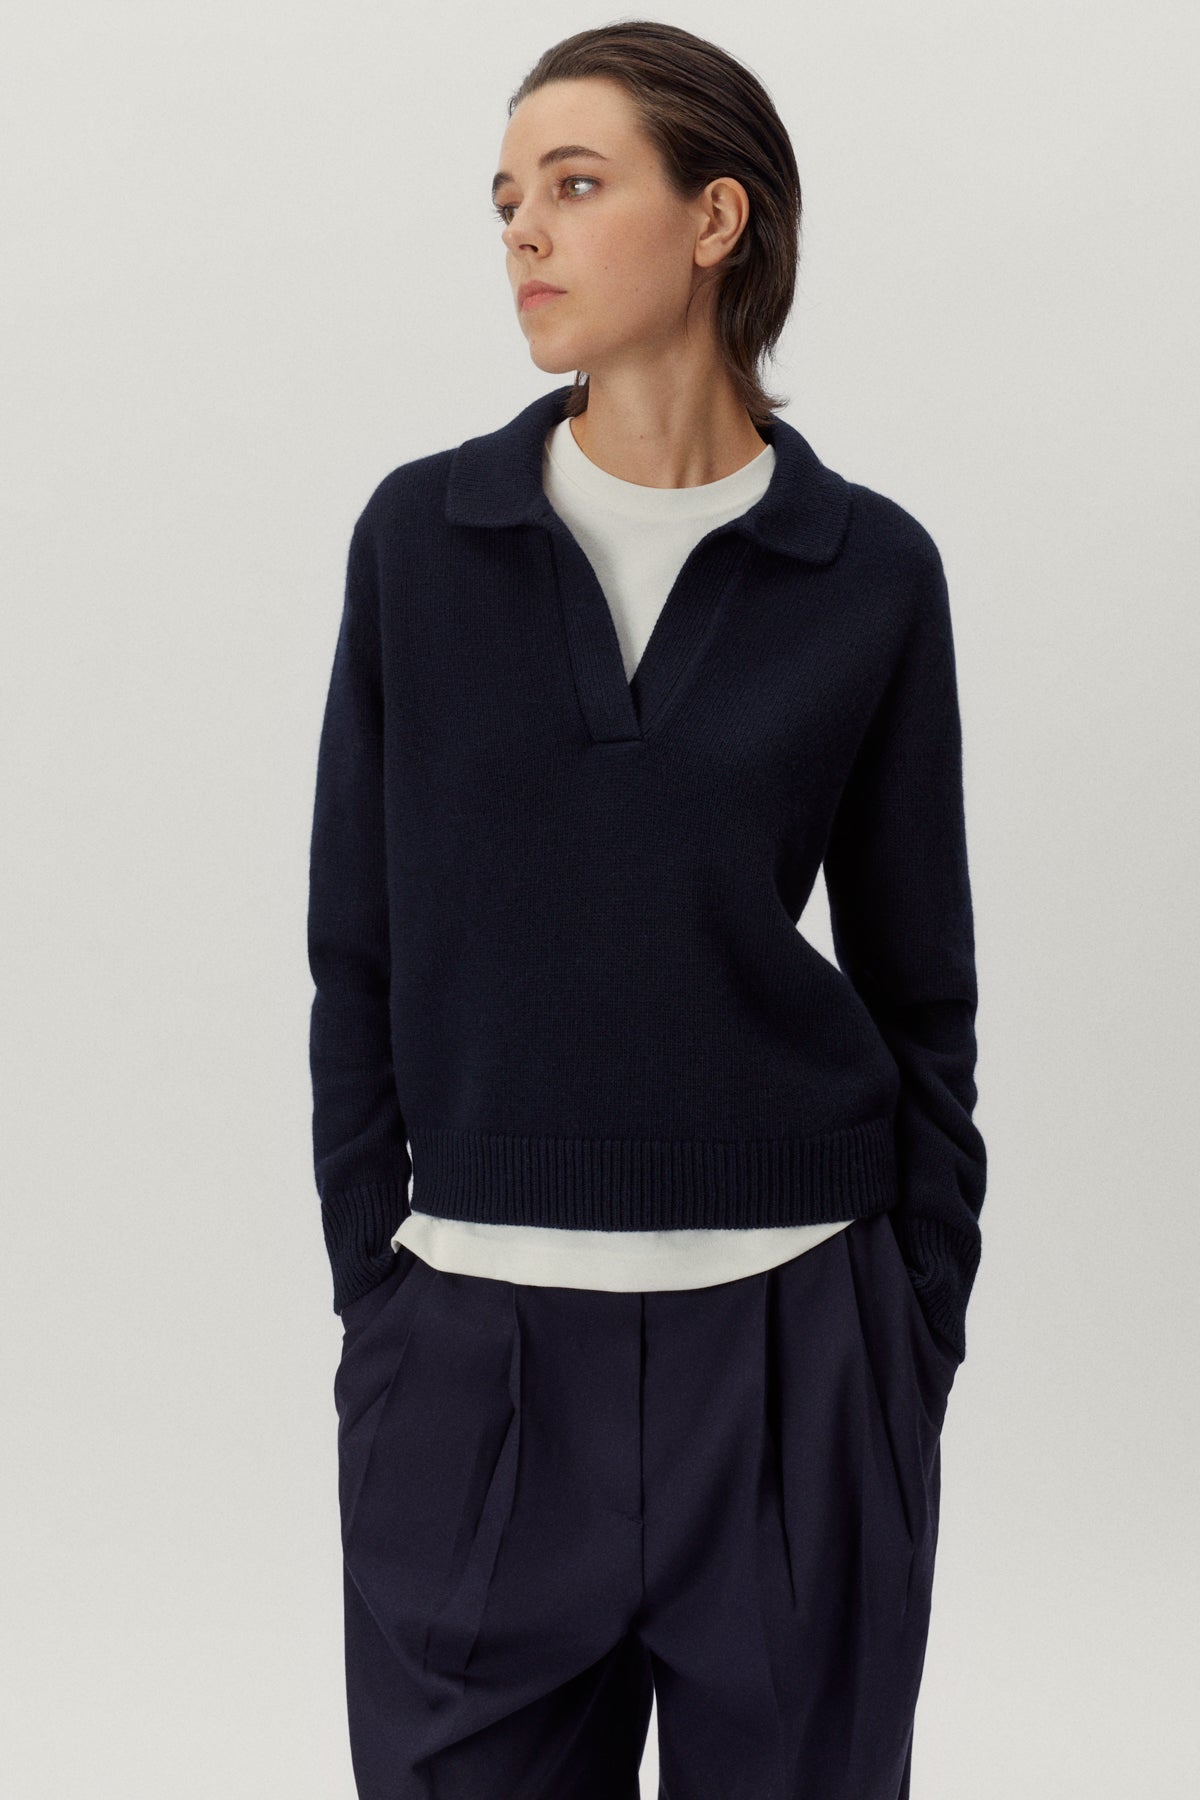 the woolen vintage polo blue navy